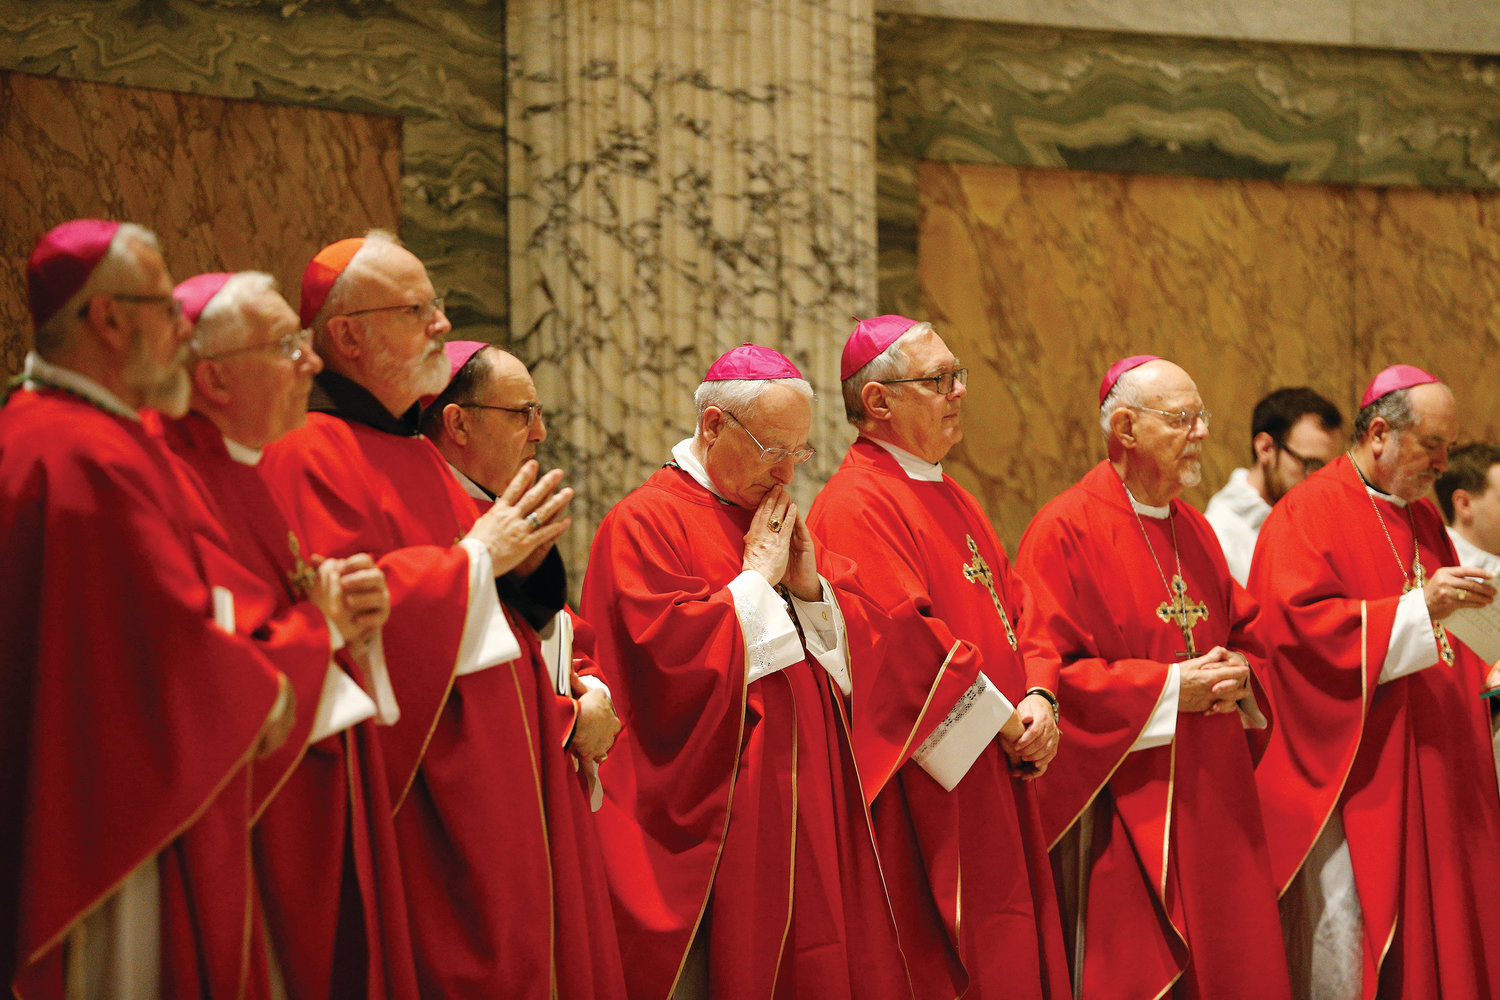 Pictured at center, Auxiliary Bishop Robert C. Evans,  Bishop Thomas J. Tobin, and retired Auxiliary Bishop Peter A. Rosazza of Hartford, Conn., concelebrate Mass with other U.S. bishops from the New England states at the Basilica of St. Paul Outside the Walls in Rome Nov. 5.